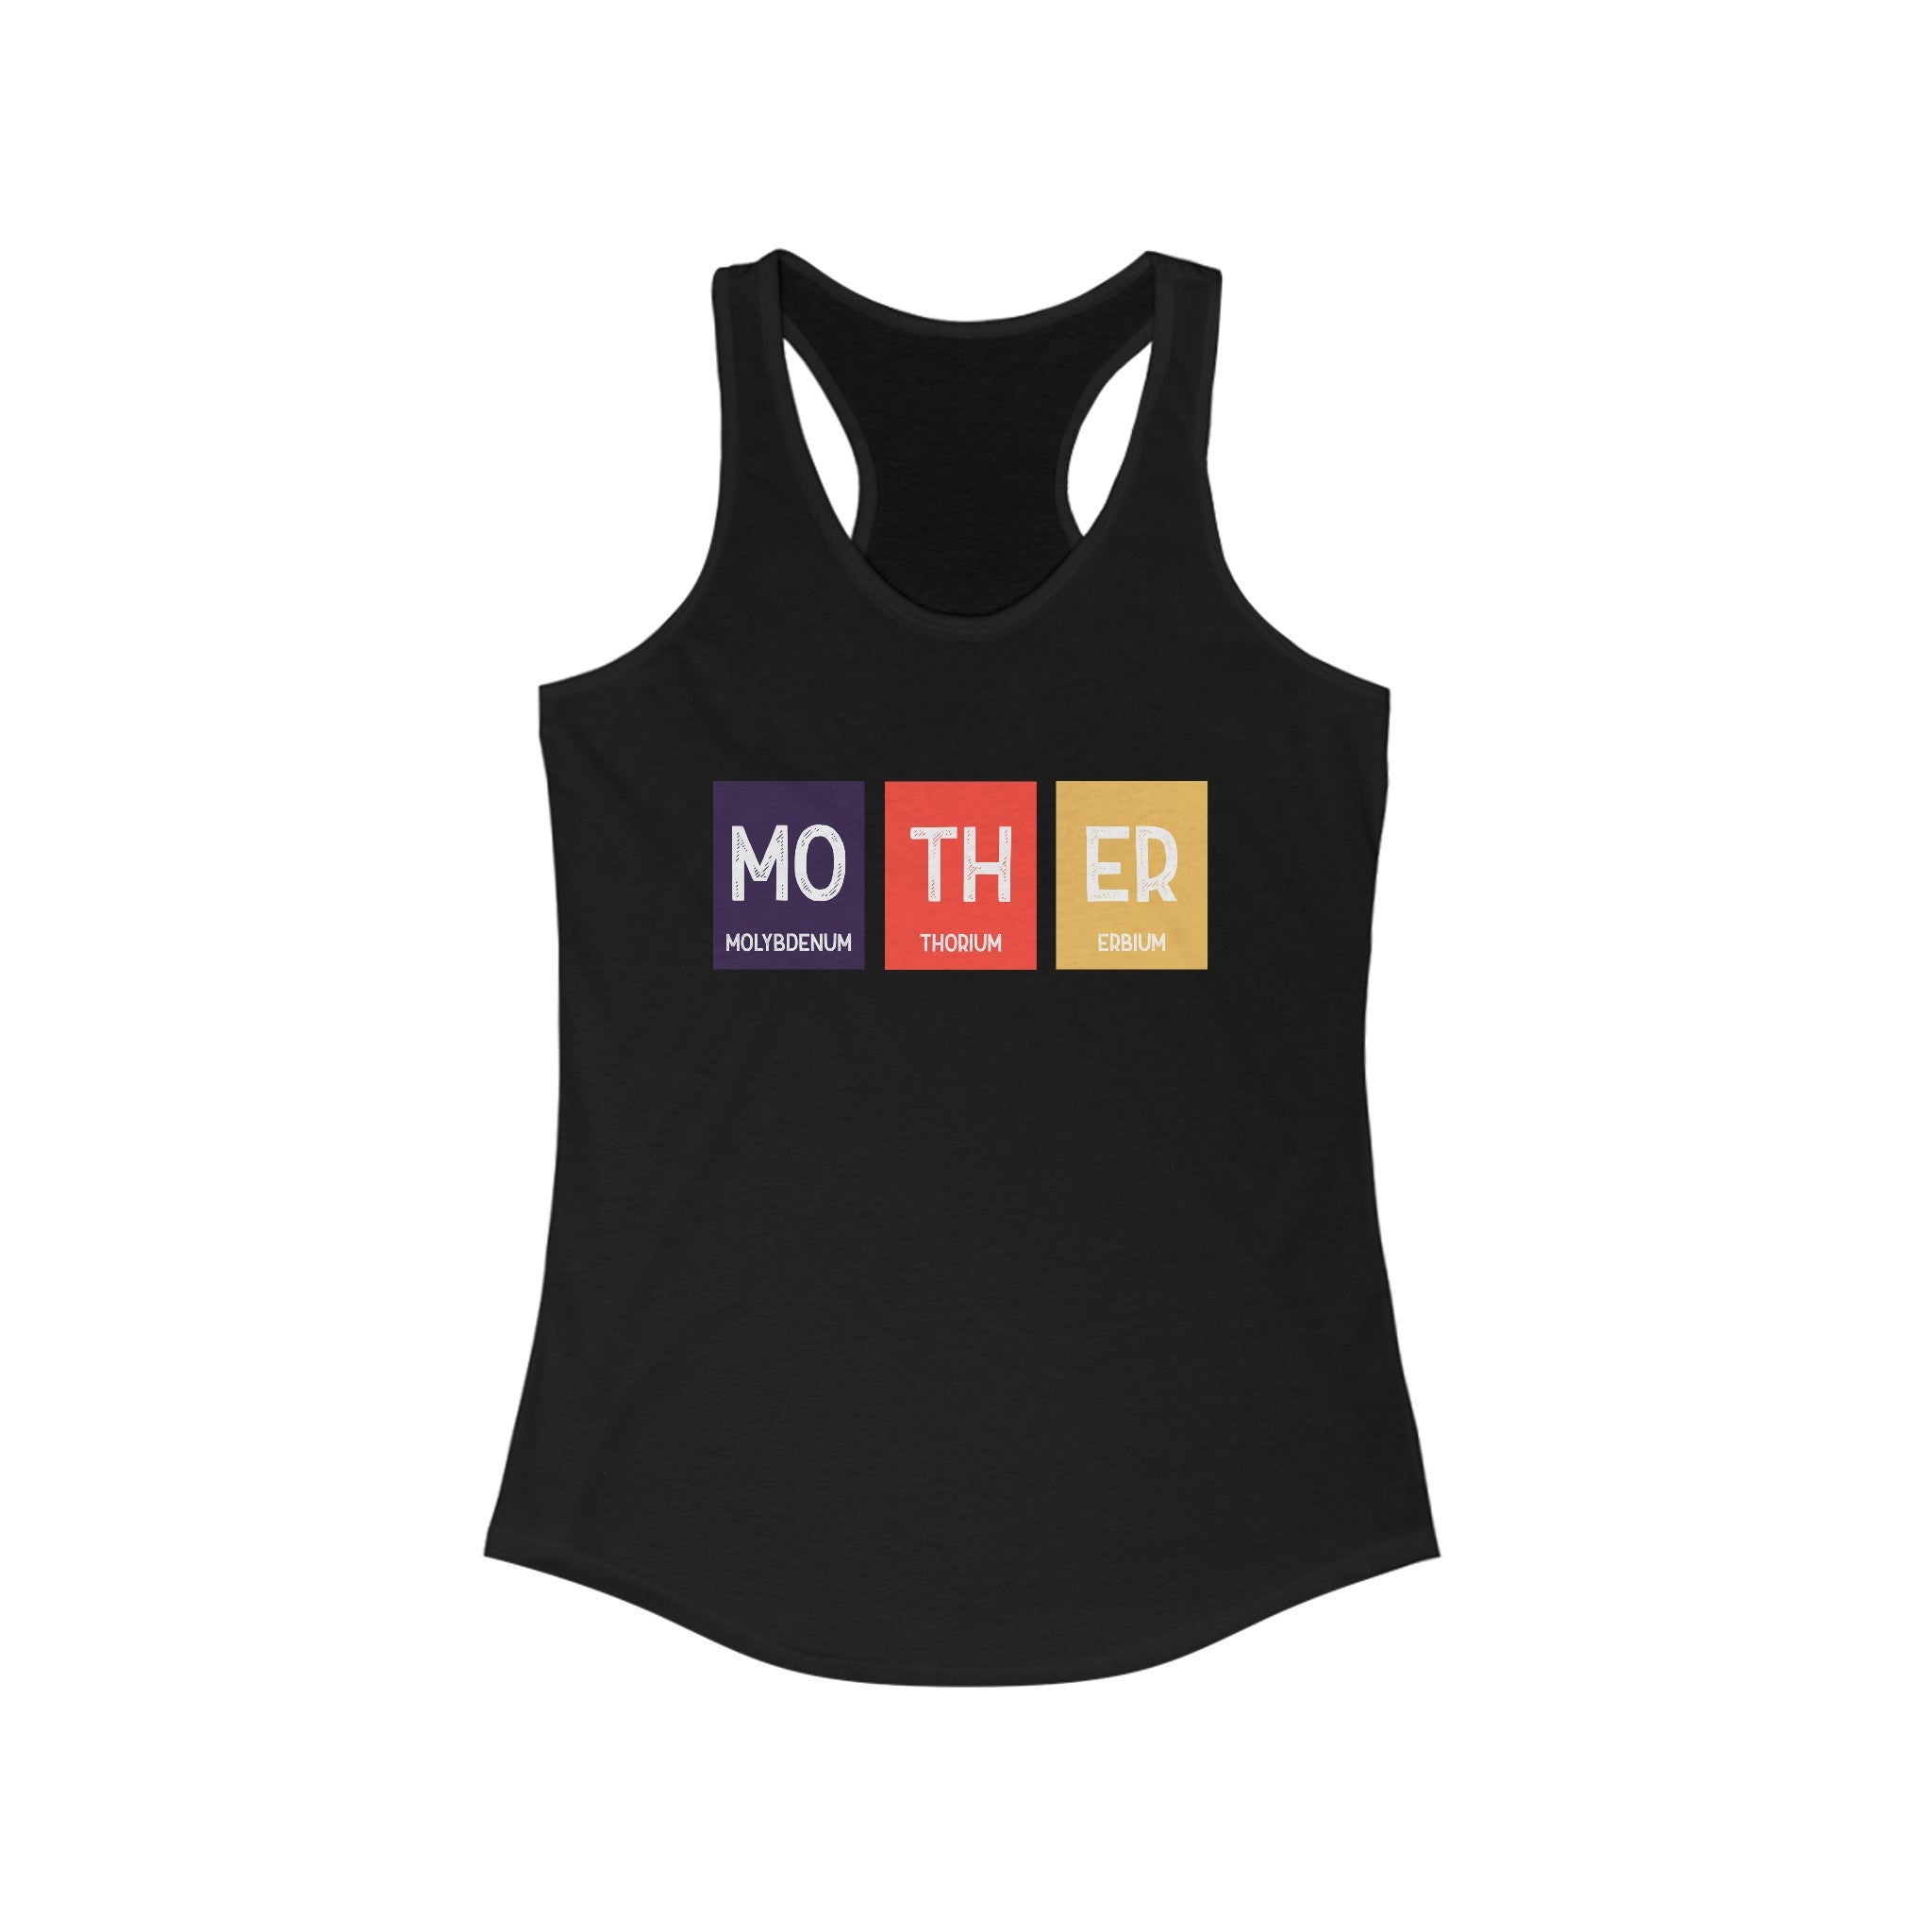 Mo-TH-ER - Women's Racerback Tank featuring a lightweight workout tank design with "MOTHER" written using periodic table element symbols for Molybdenum, Thorium, and Erbium. This unique Mo-TH-ER design combines style and science seamlessly.